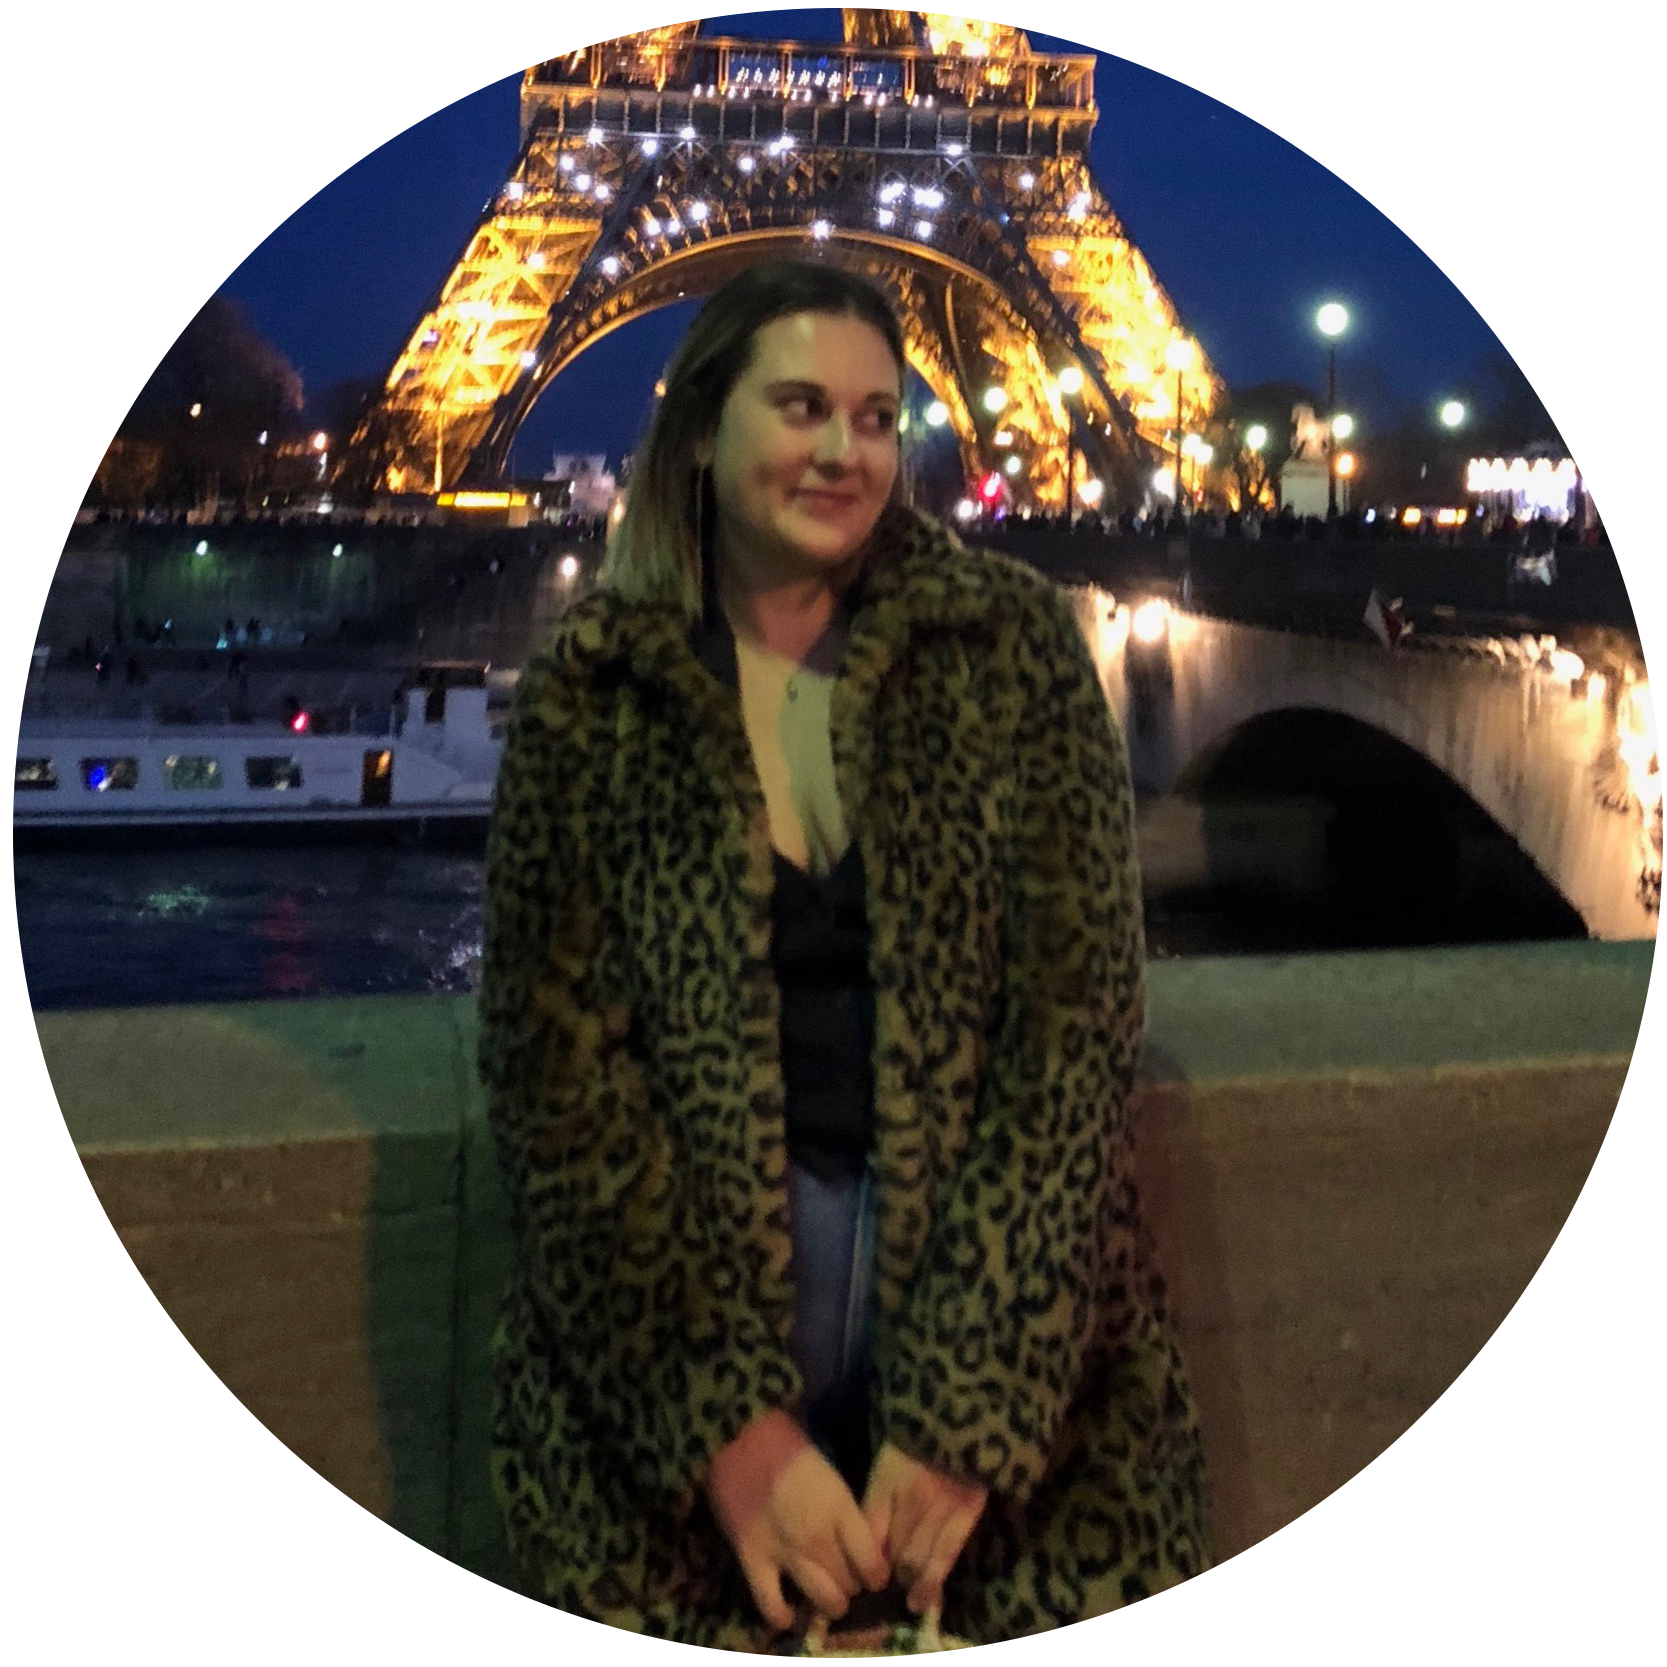 Liz Lemerand in front of the Eiffel Tower in Paris France.